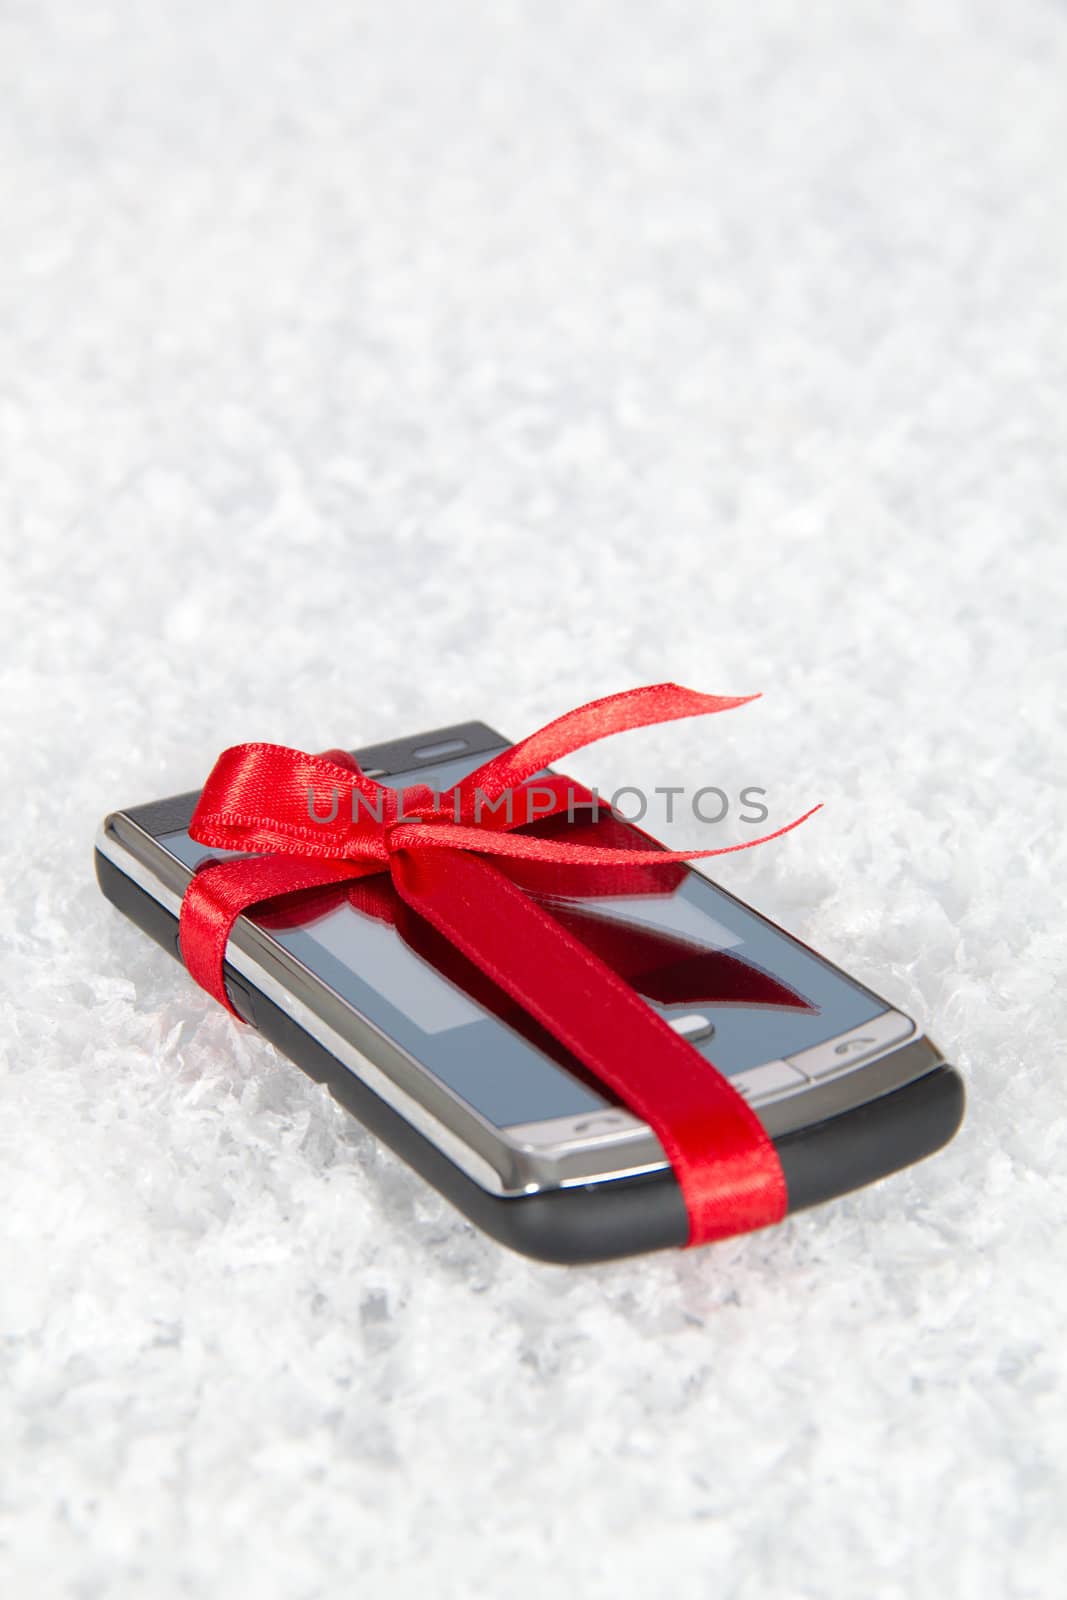 Mobile phone in a gift by a holiday